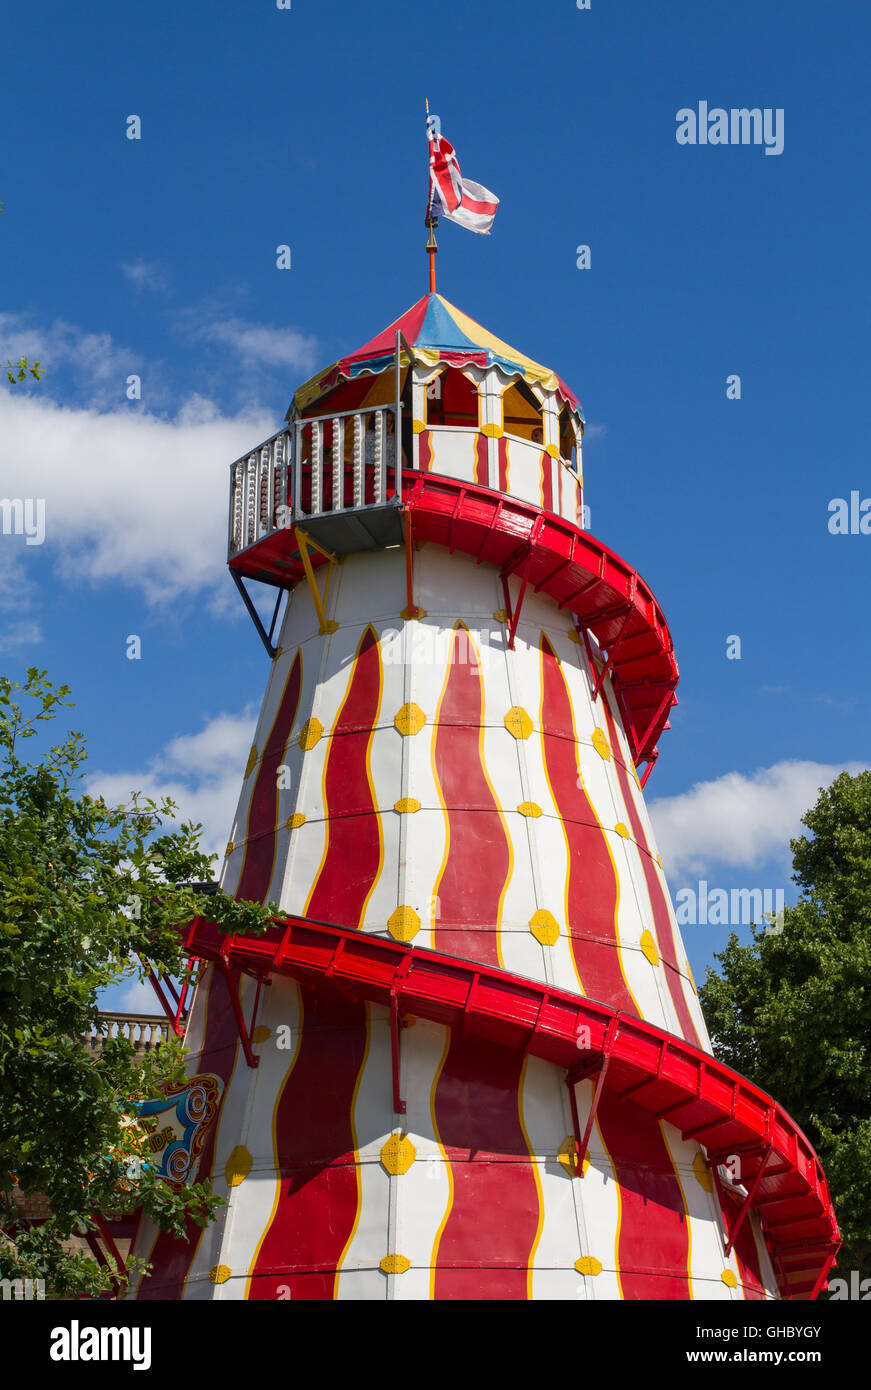 The colorful, tall structure of a Helter Skelter slide at a funfair or fairground under a bright, blue sky. Stock Photo